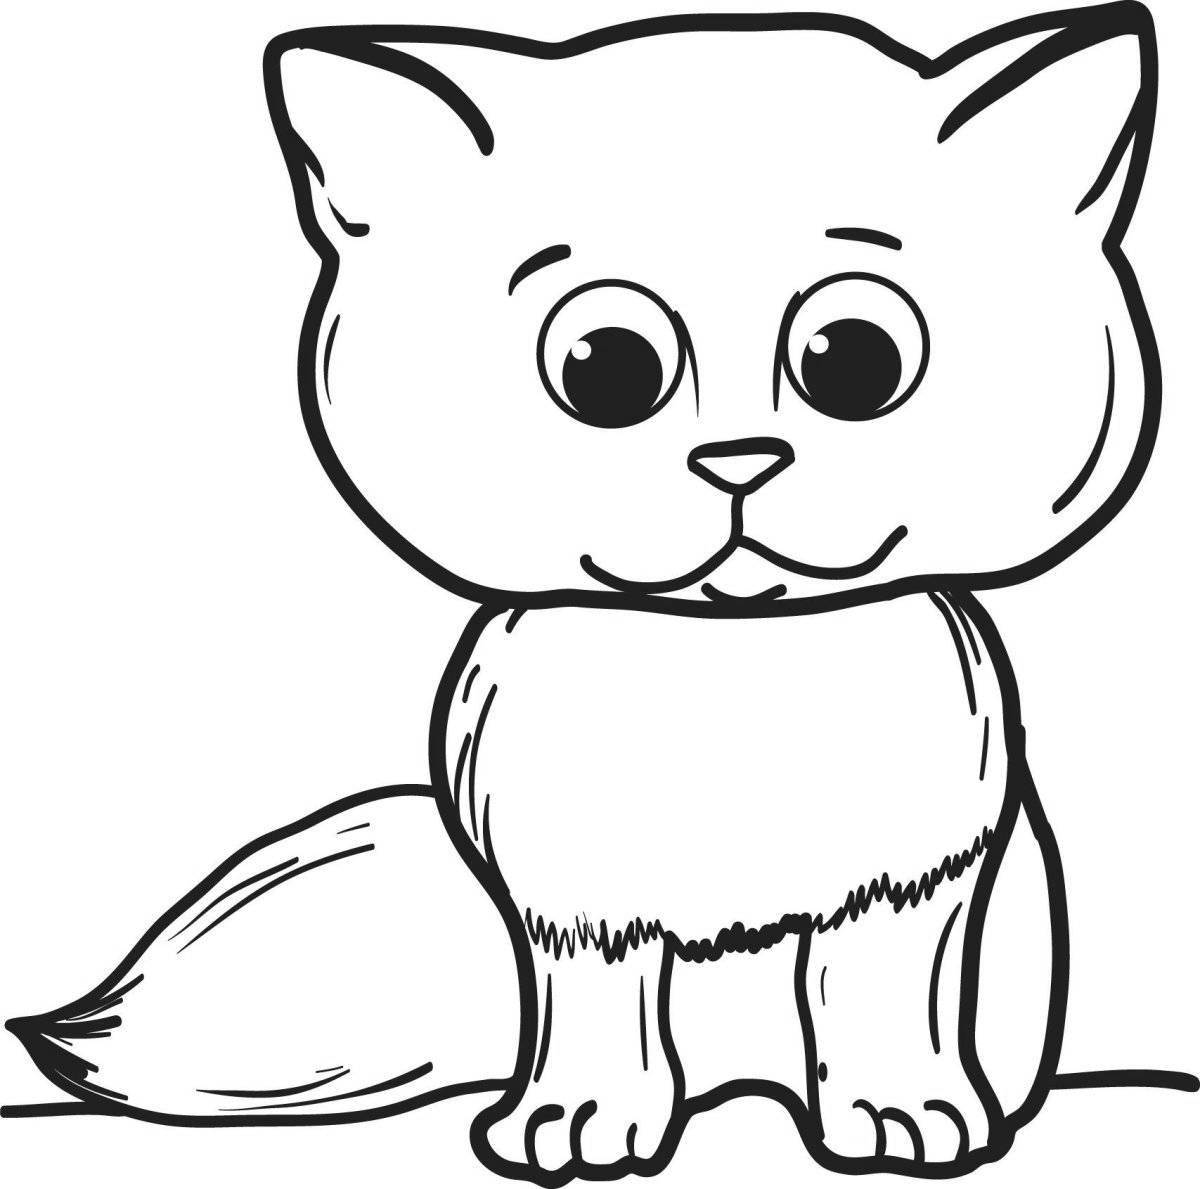 Coloring book big-tailed kitten for children